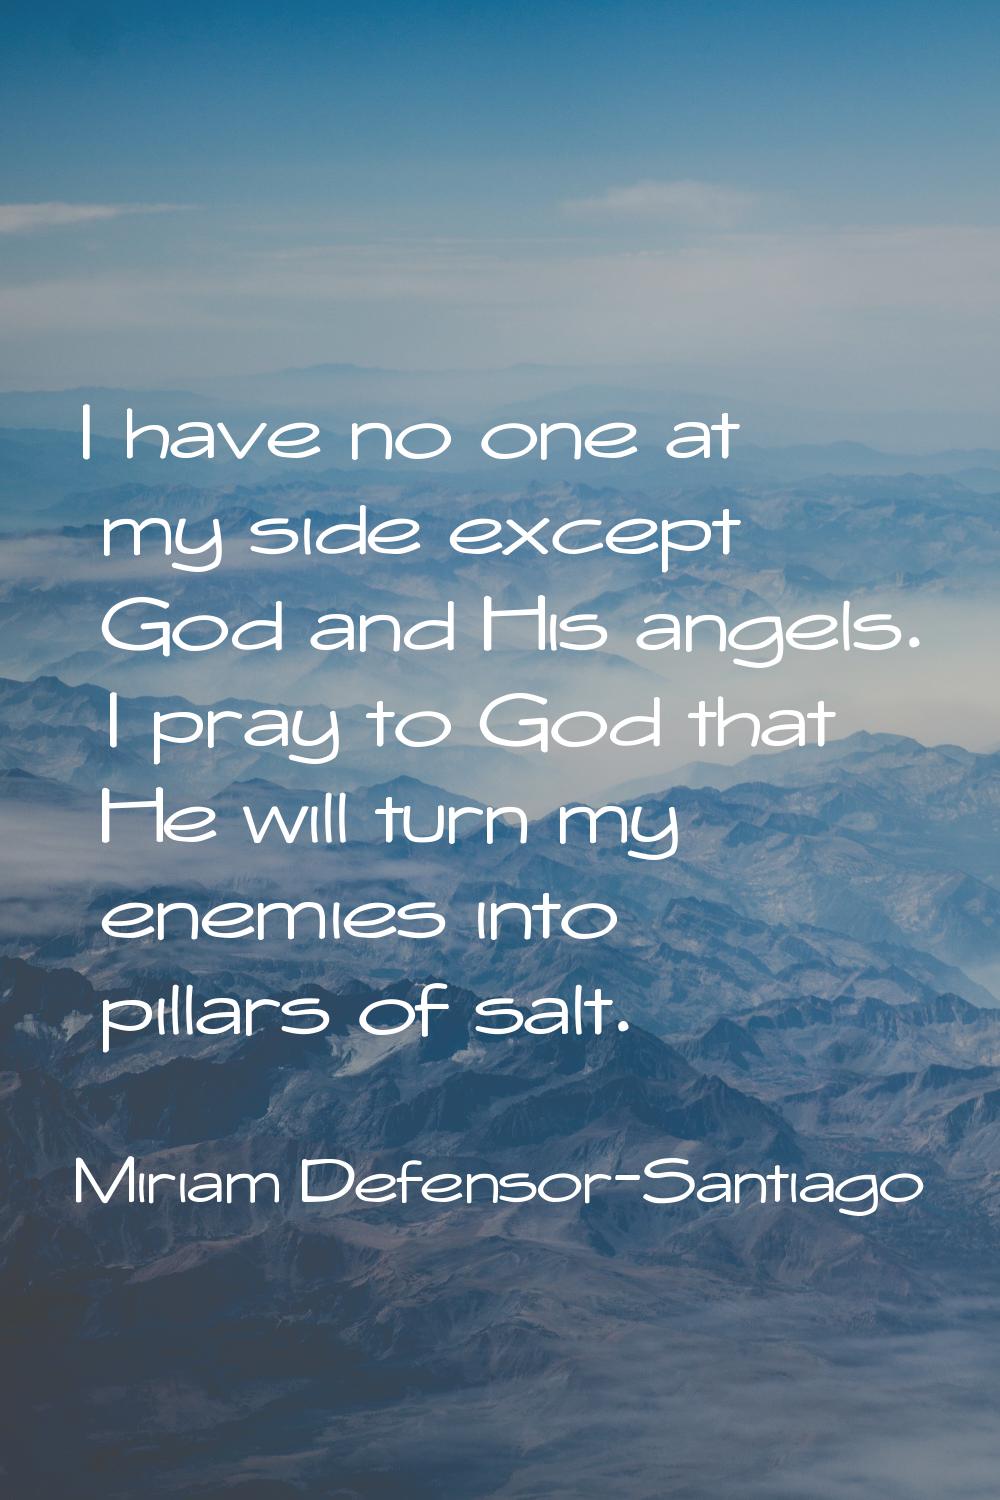 I have no one at my side except God and His angels. I pray to God that He will turn my enemies into